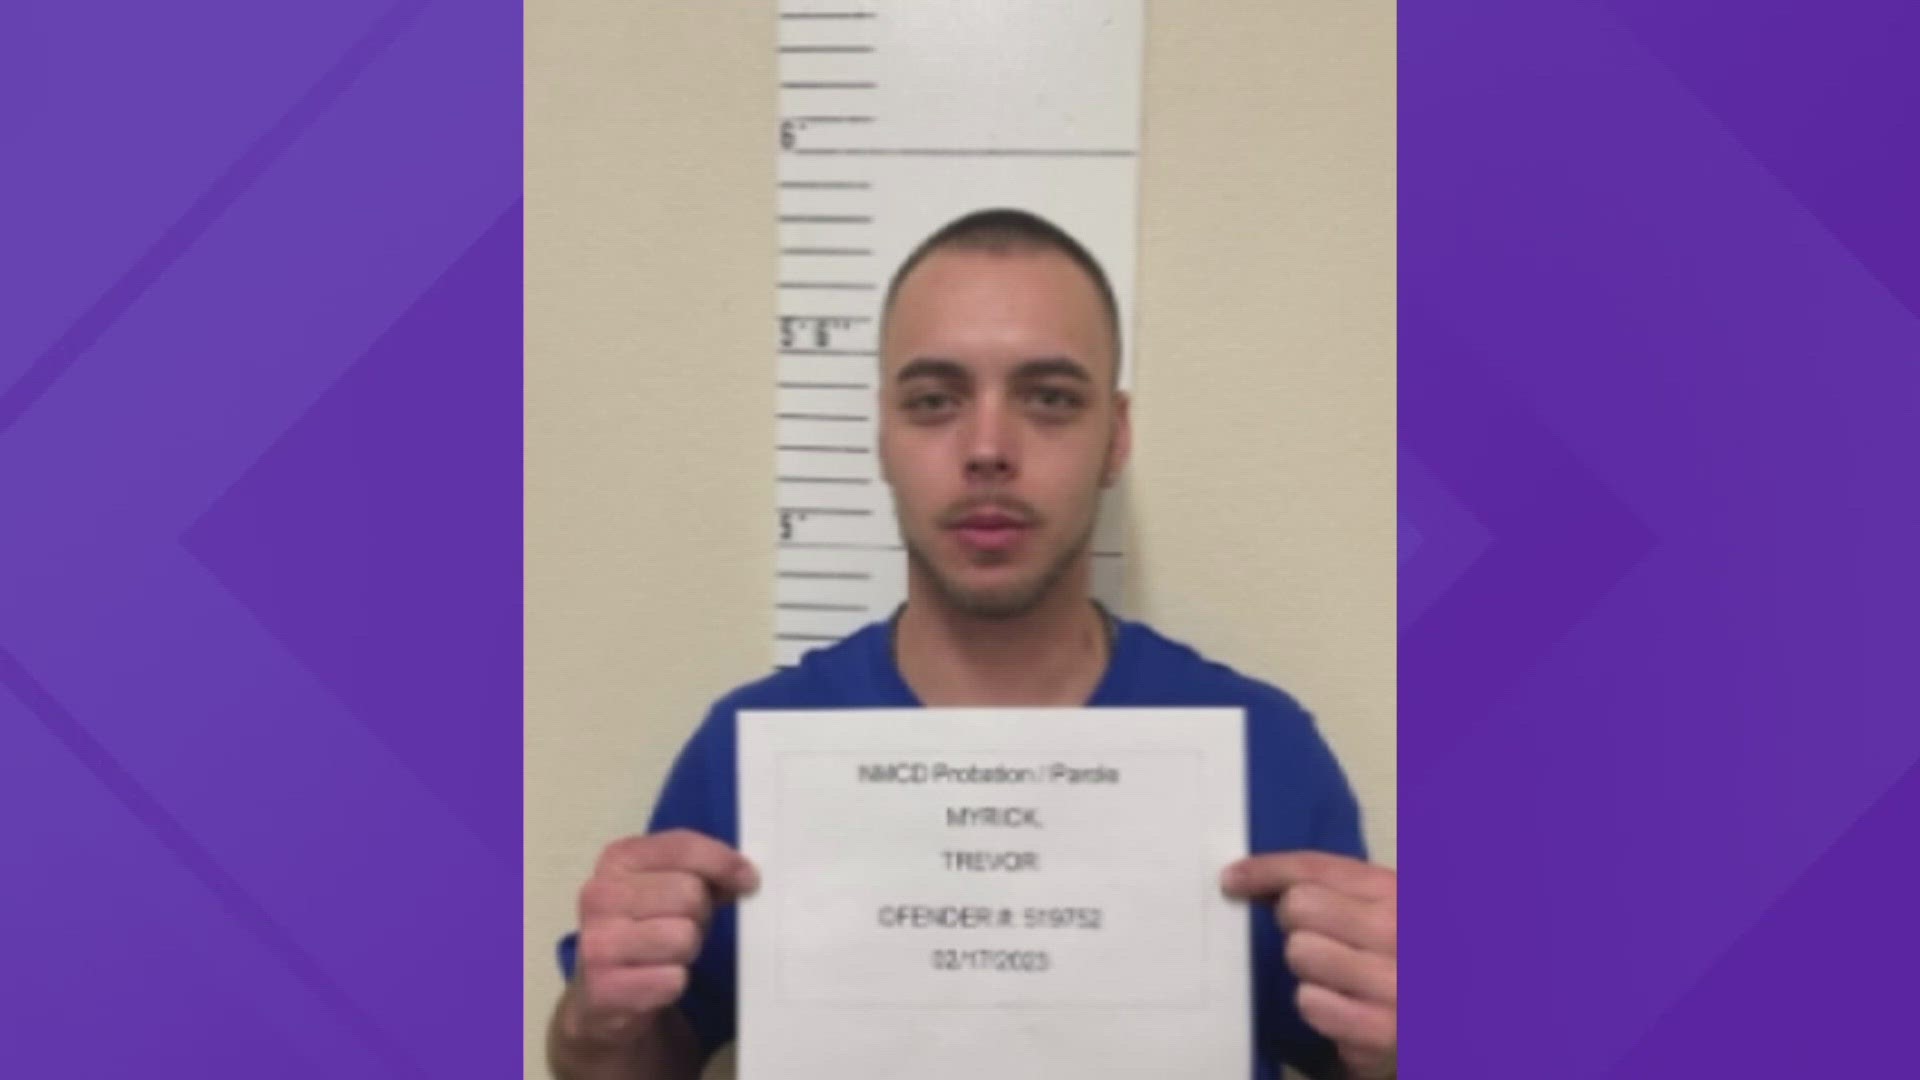 Texas DPS said the suspect who was shot and killed after an officer-involved shooting was 26-year-old Trevor James Myrick of Hobbs, New Mexico.